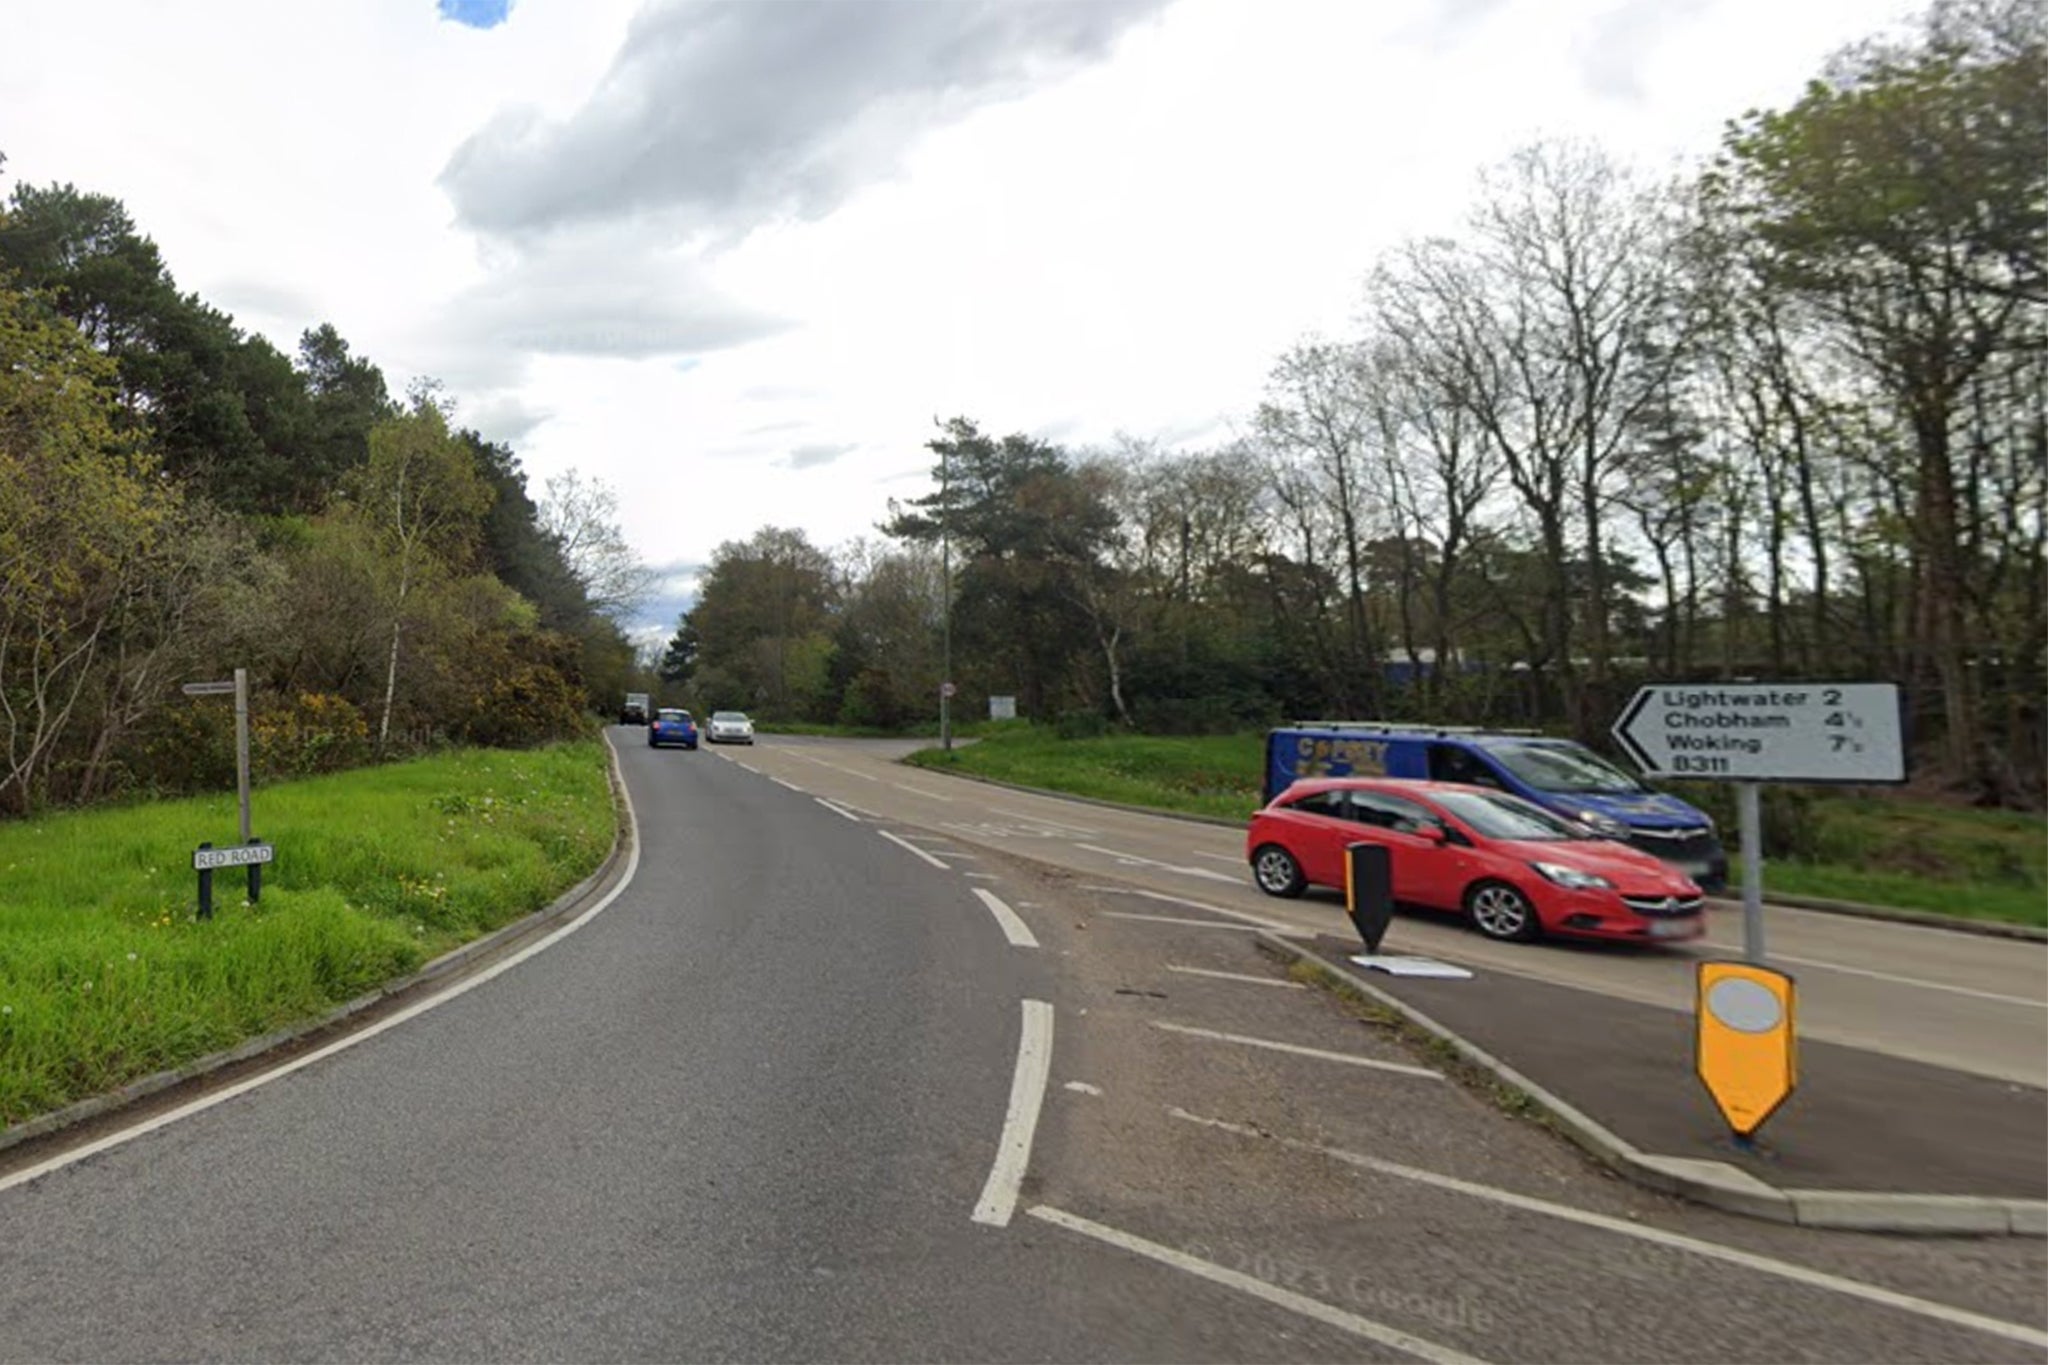 A section of Red Road near Lightwater was closed after Sunday night’s crash